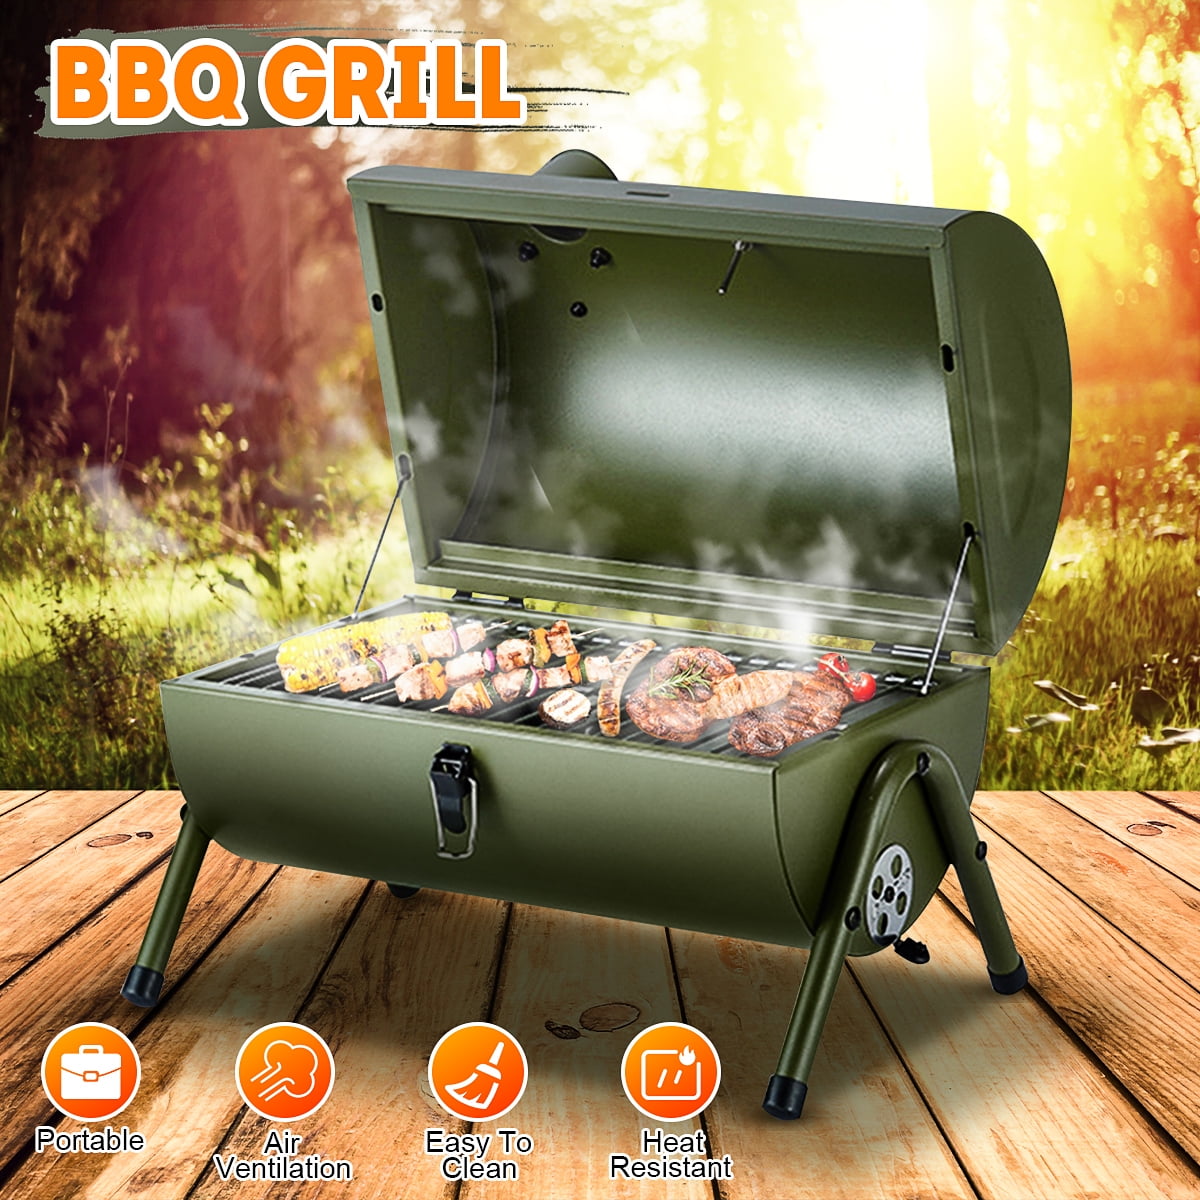 Portable Barbecue Grill BBQ Charcoal Grill Stainless Steel Barbecue Grill Foldable Table Coal Garden Travel Camping Folding Grill 3-5 People Gifort Barbecue Grill